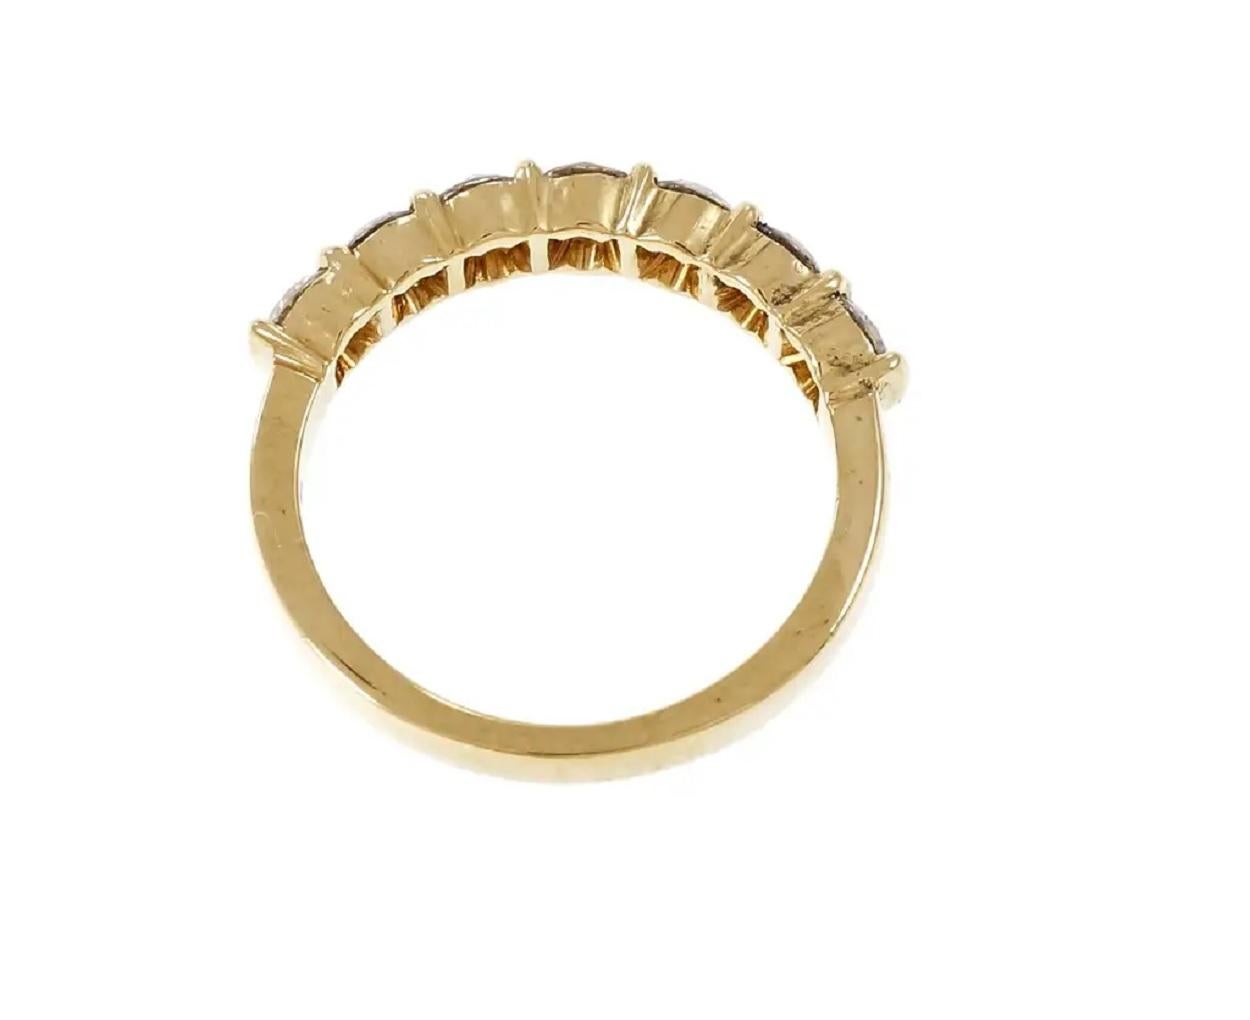 Brand :Tiffany & co
Condition :Pre-owned
Gender:  Women
Metal: 18K yellow gold
Ring Size: 7 (Sizable)
Weight: 3.5gr
Width: 2.0
Carat weight: 0.70ct
Diamond color: F
Diamond clarity: VS
Number of diamonds :7
Diamond shape: Round